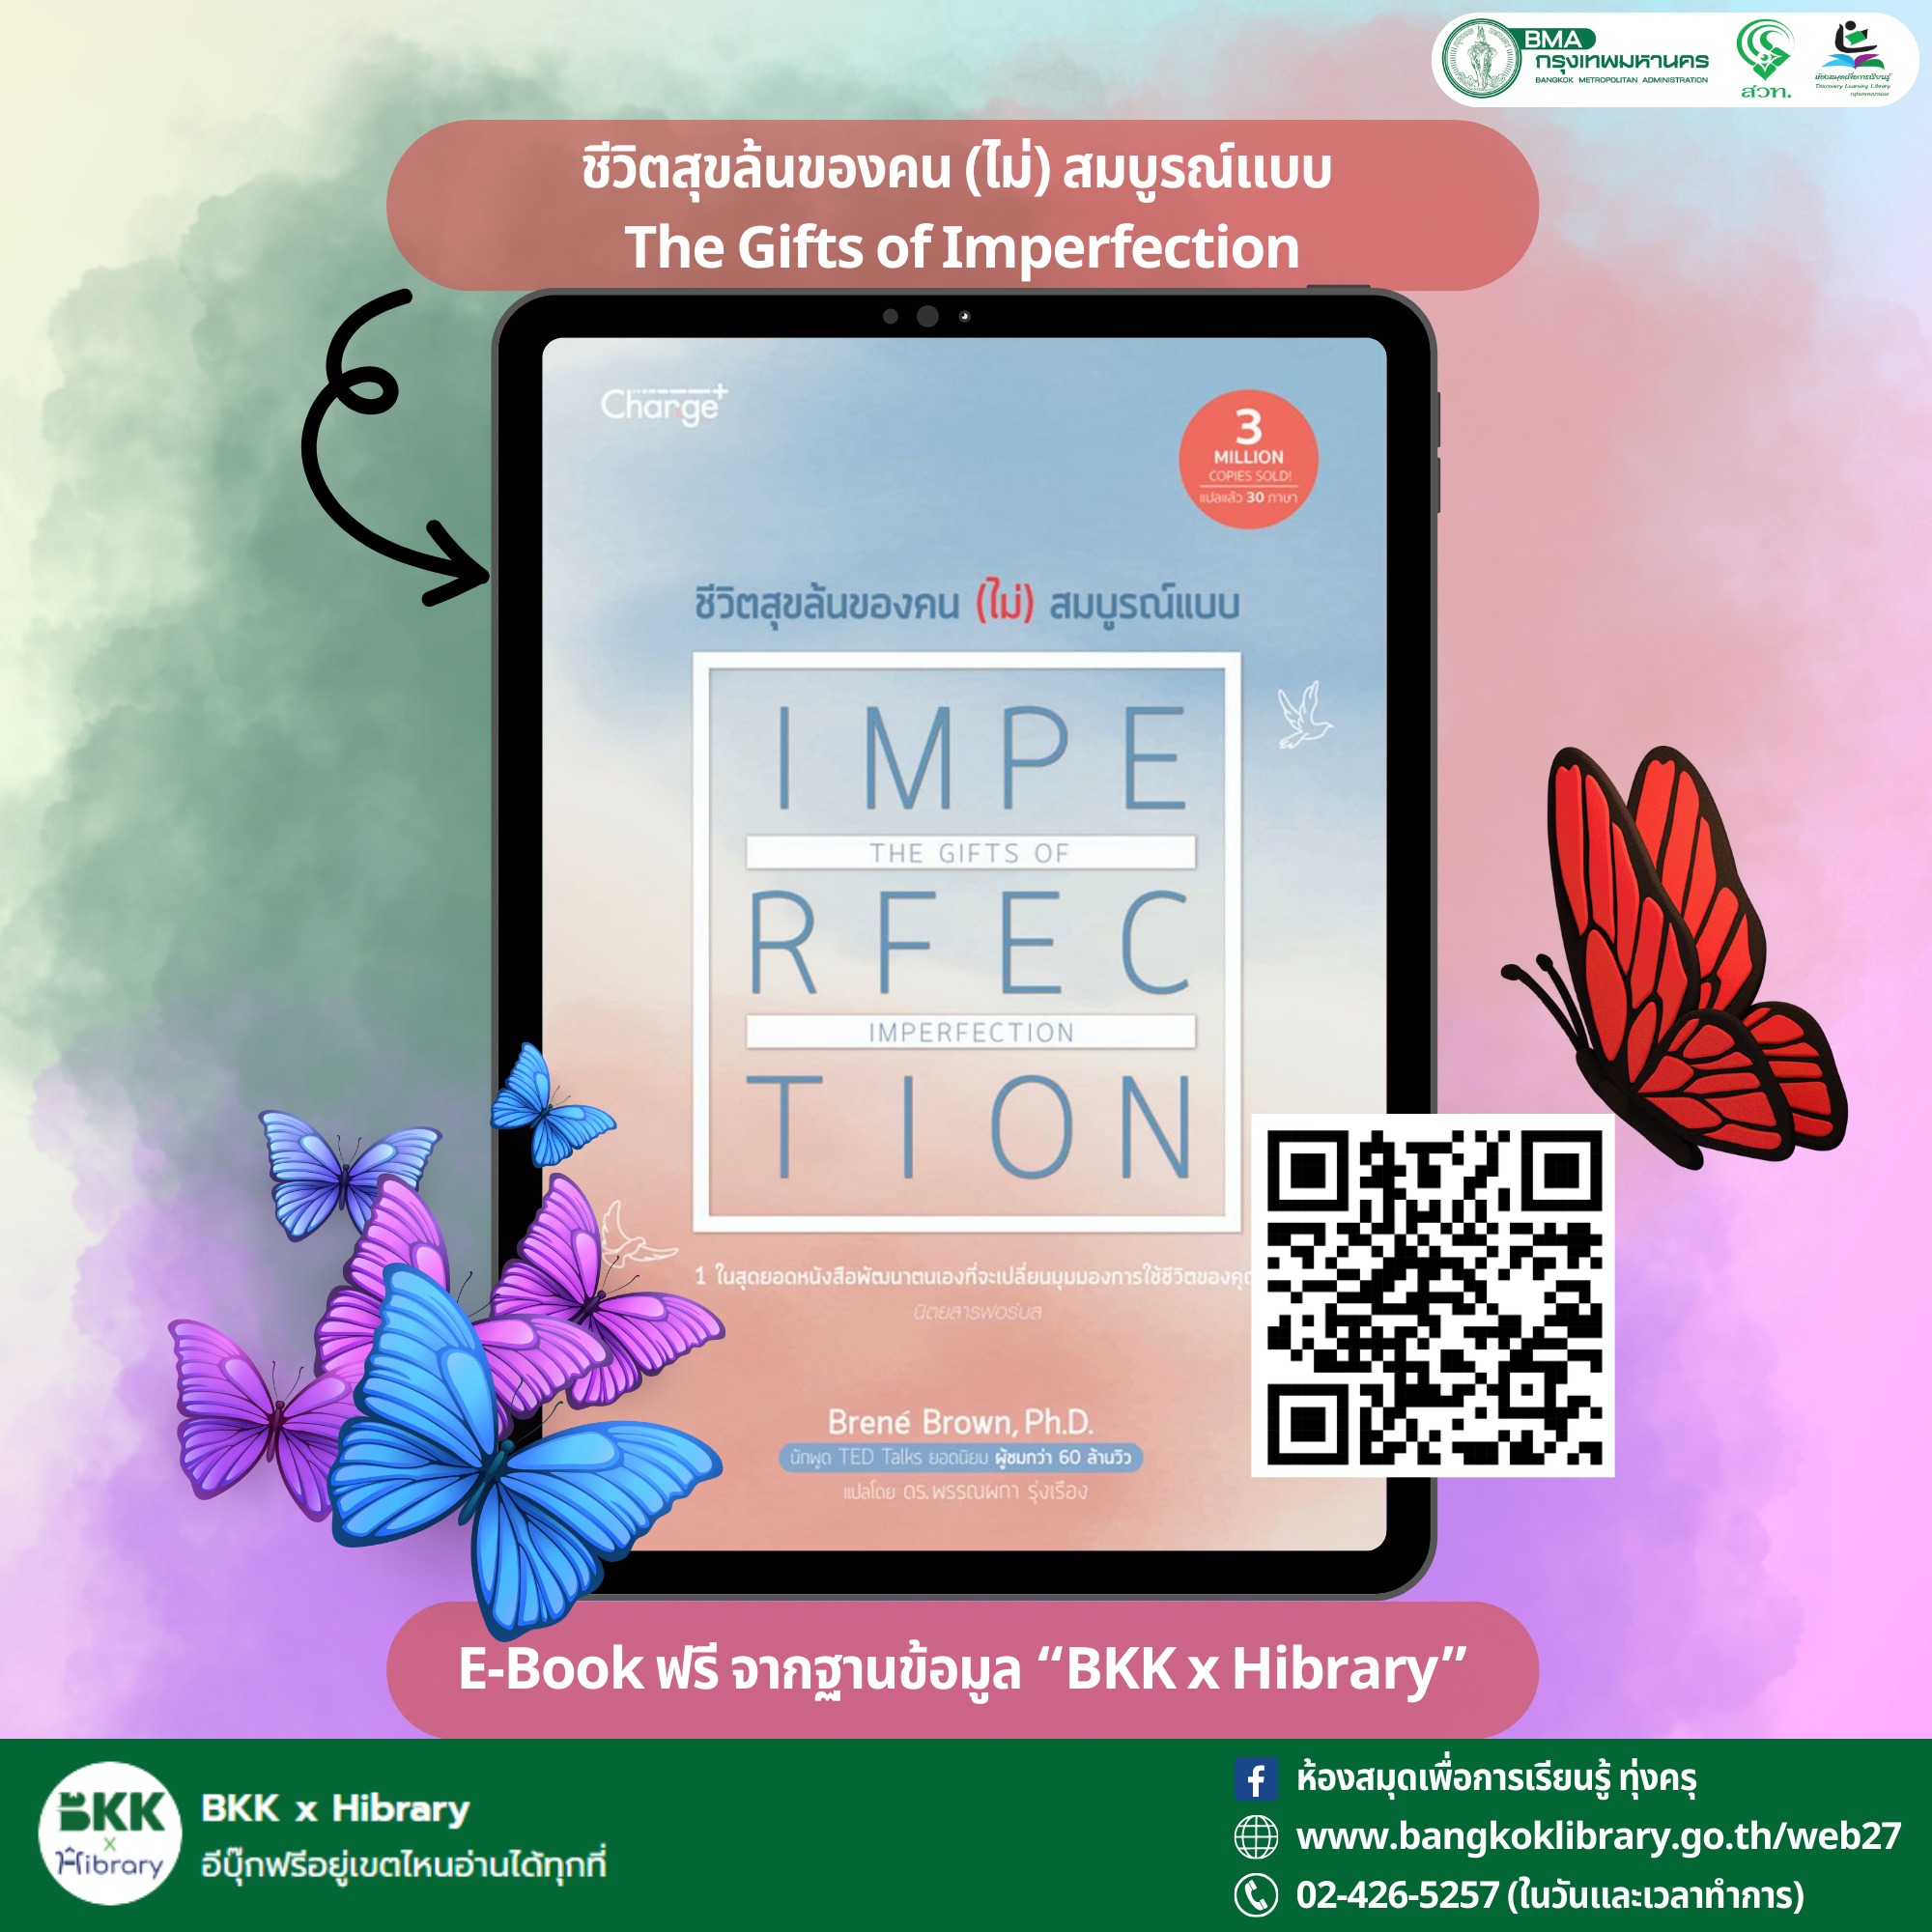 E-Book Hibrary : ชีวิตสุขล้นของคน (ไม่) สมบูรณ์แบบ The Gifts of Imperfection